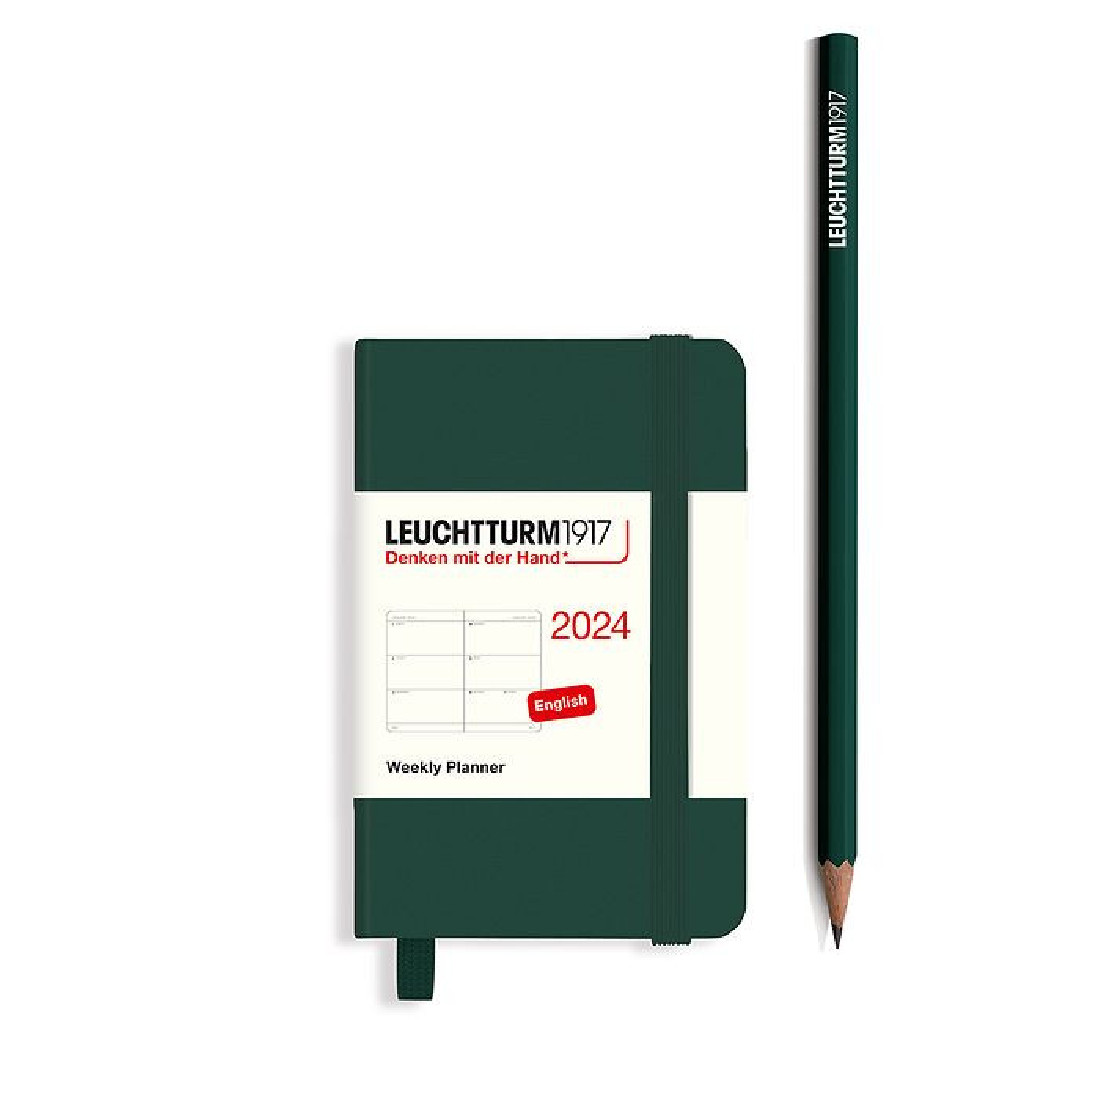 Leuchtturm 1917 Weekly Planner 2024 Forest Green Mini A7 Hard Cover